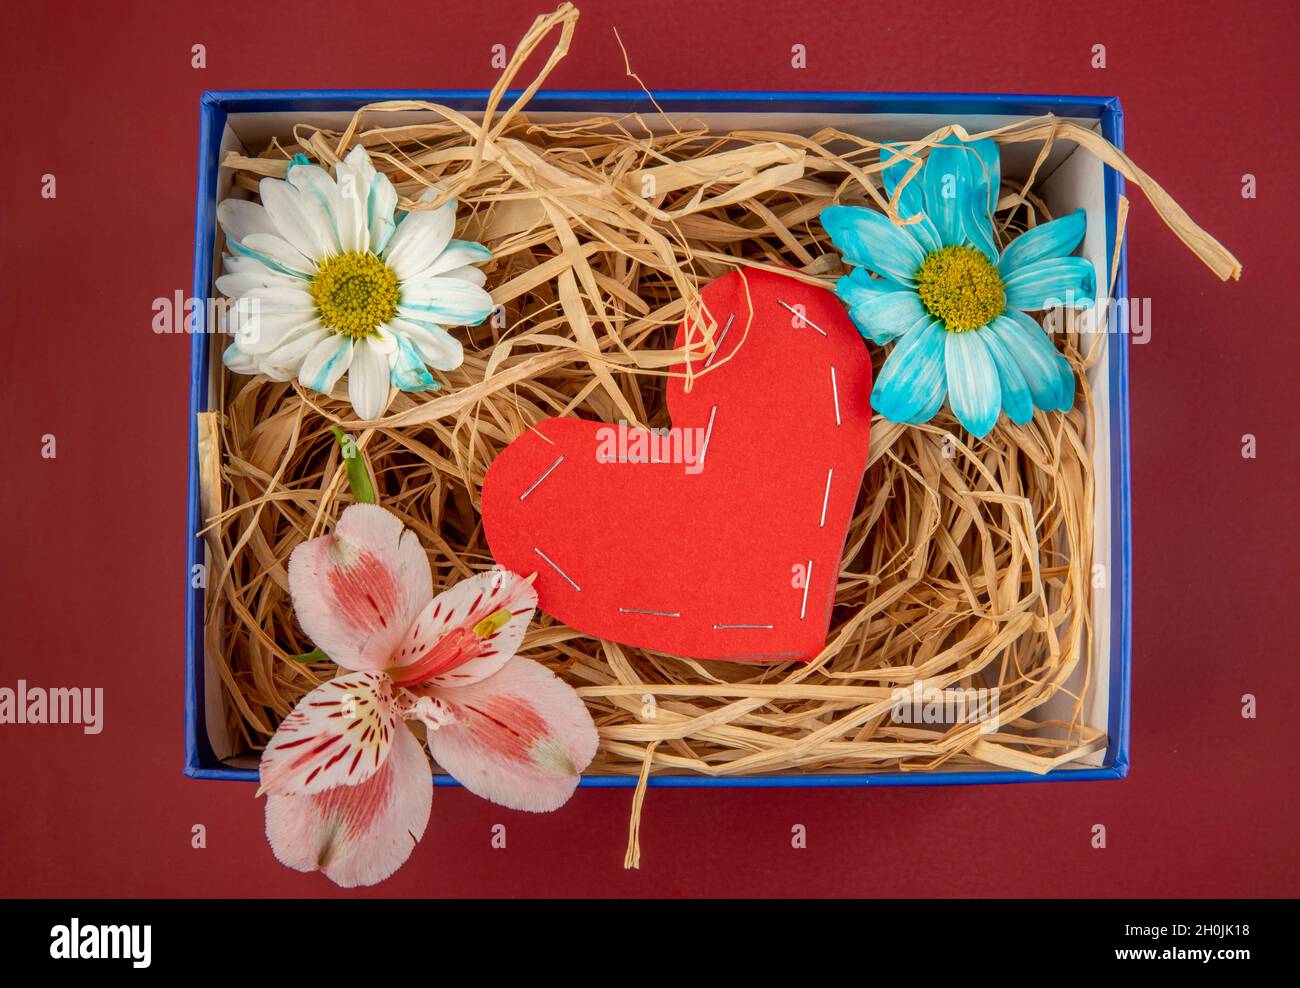 top view of colorful daisy flowers and pink alstroemeria with a heart made from red color paper and with straw in a blue present box on red background Stock Photo